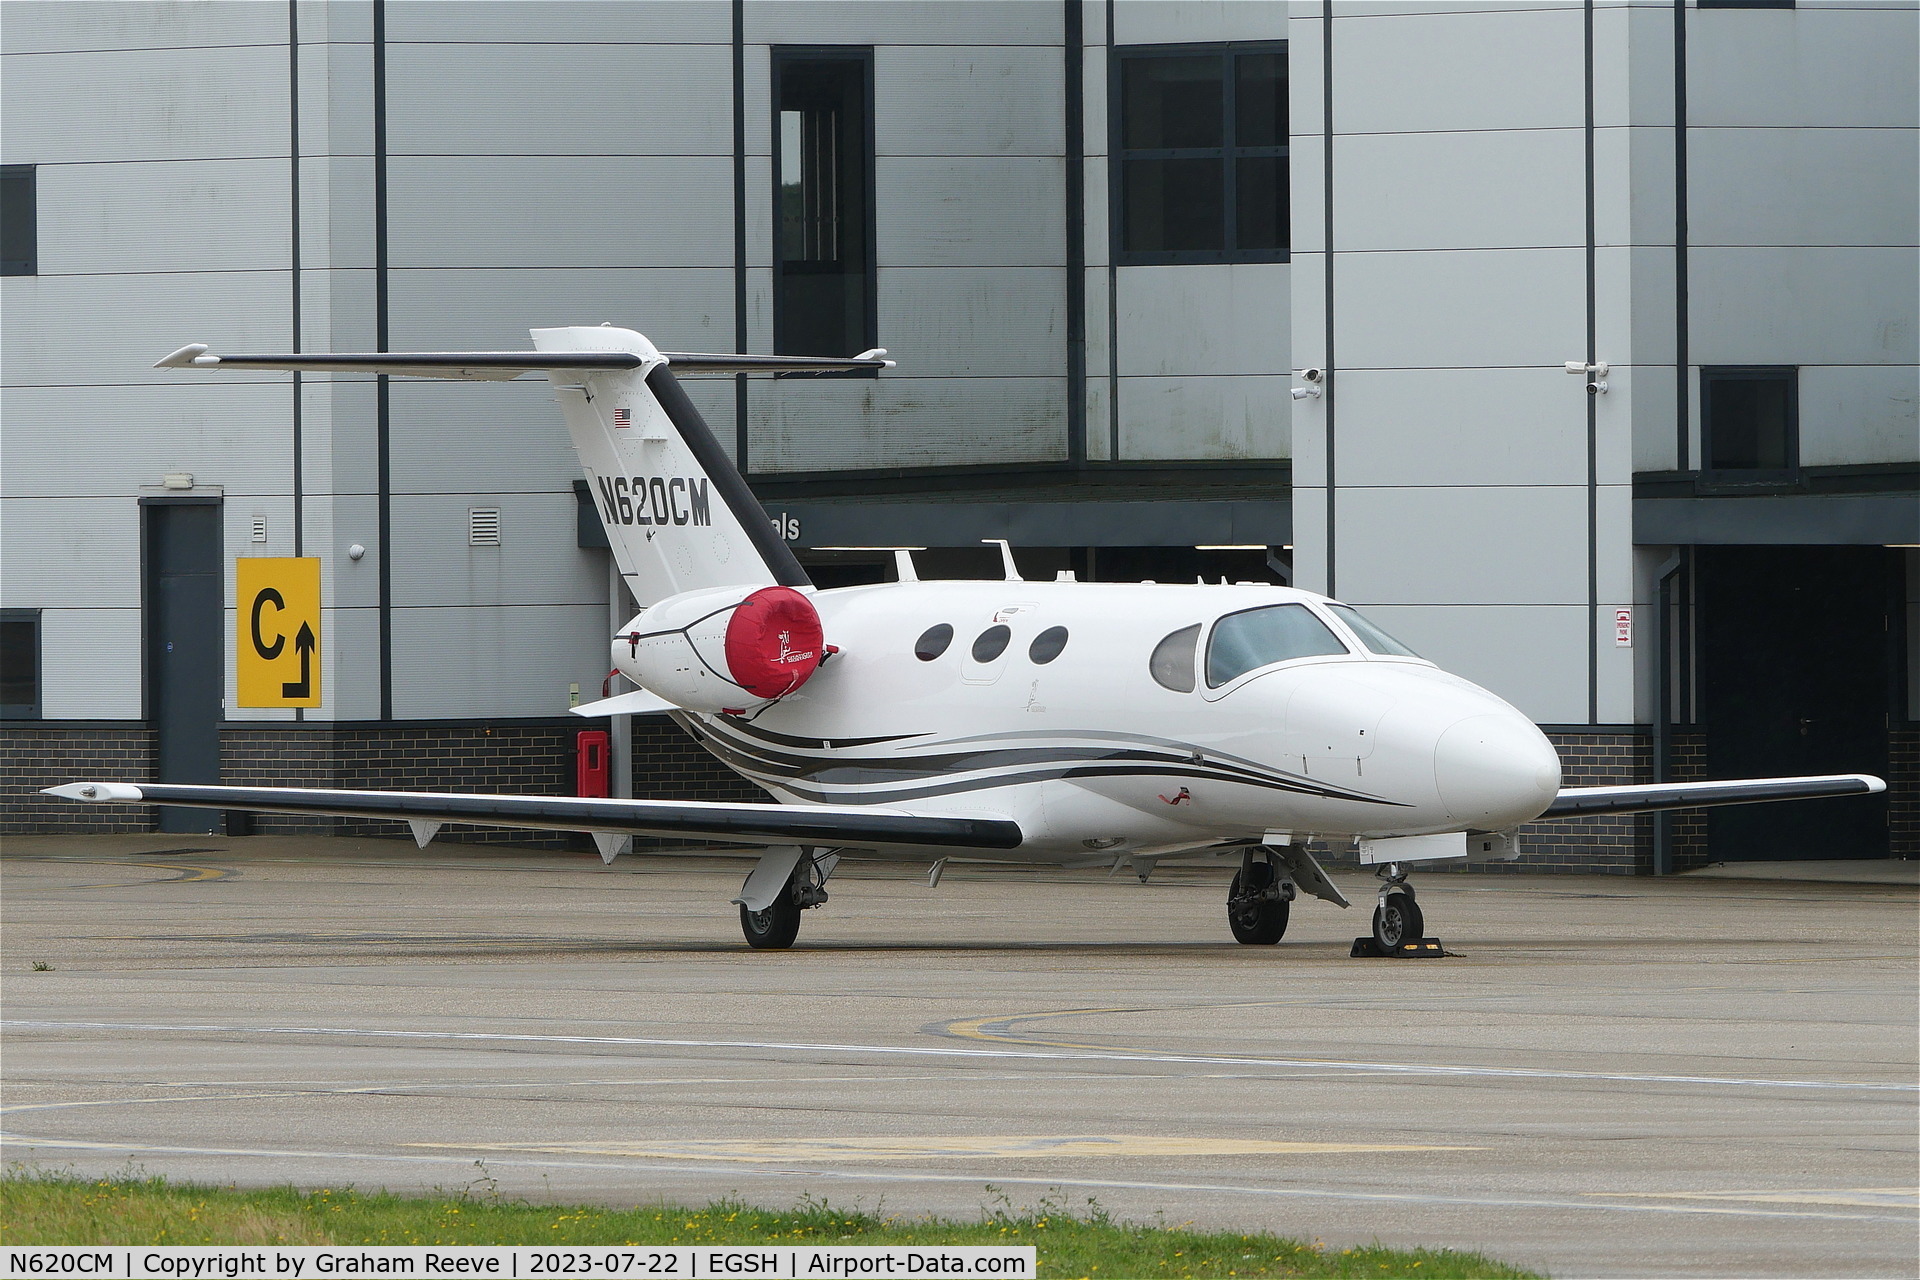 N620CM, 2000 Cessna 510 Citation Mustang Citation Mustang C/N 510-0206, Parked at Norwich.